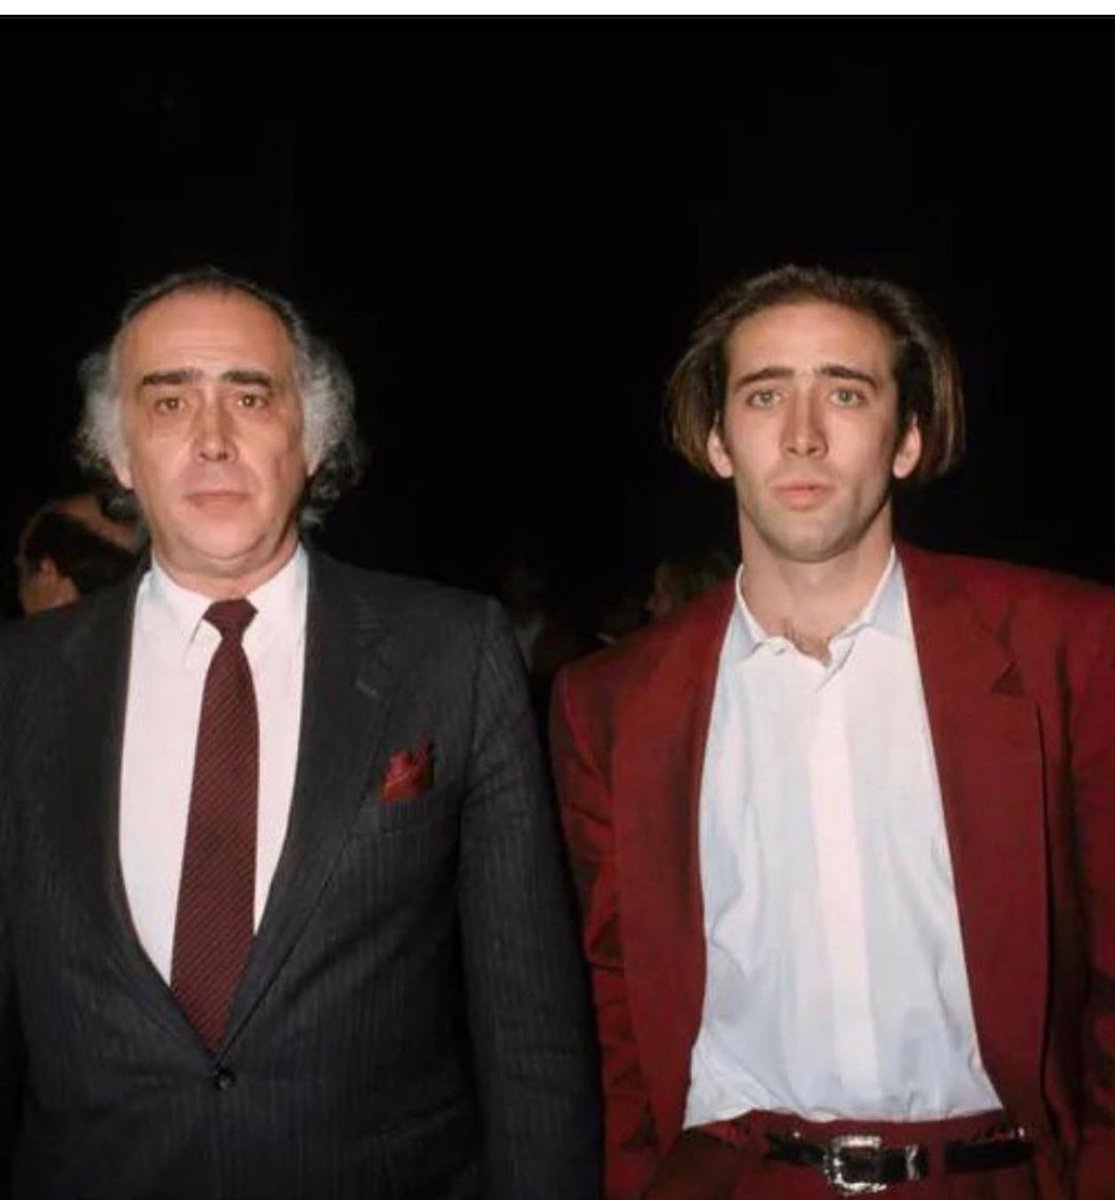 Weird how Nicolas Cage’s dad looks exactly like an older version of the young Nicolas Cage, but nothing like what Nicolas Cage looks like now that he’s older